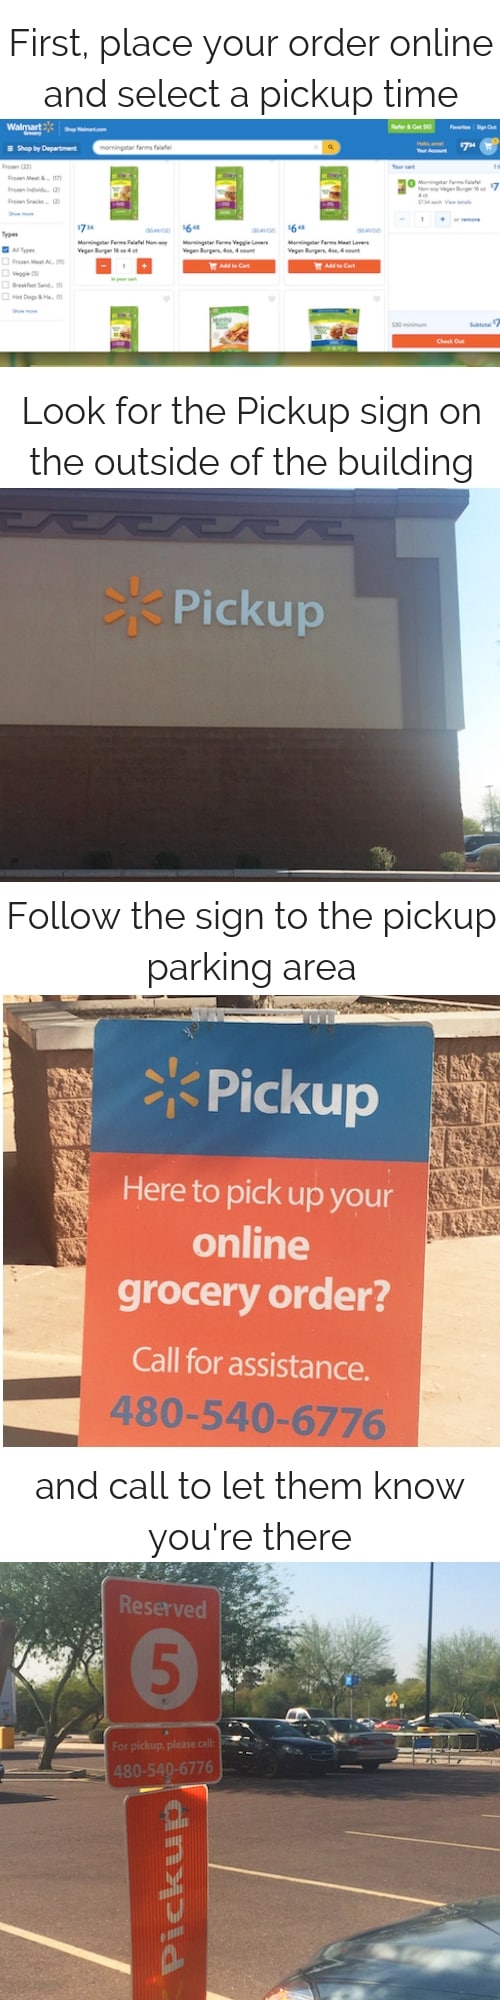 how does Walmart's online grocery pickup work